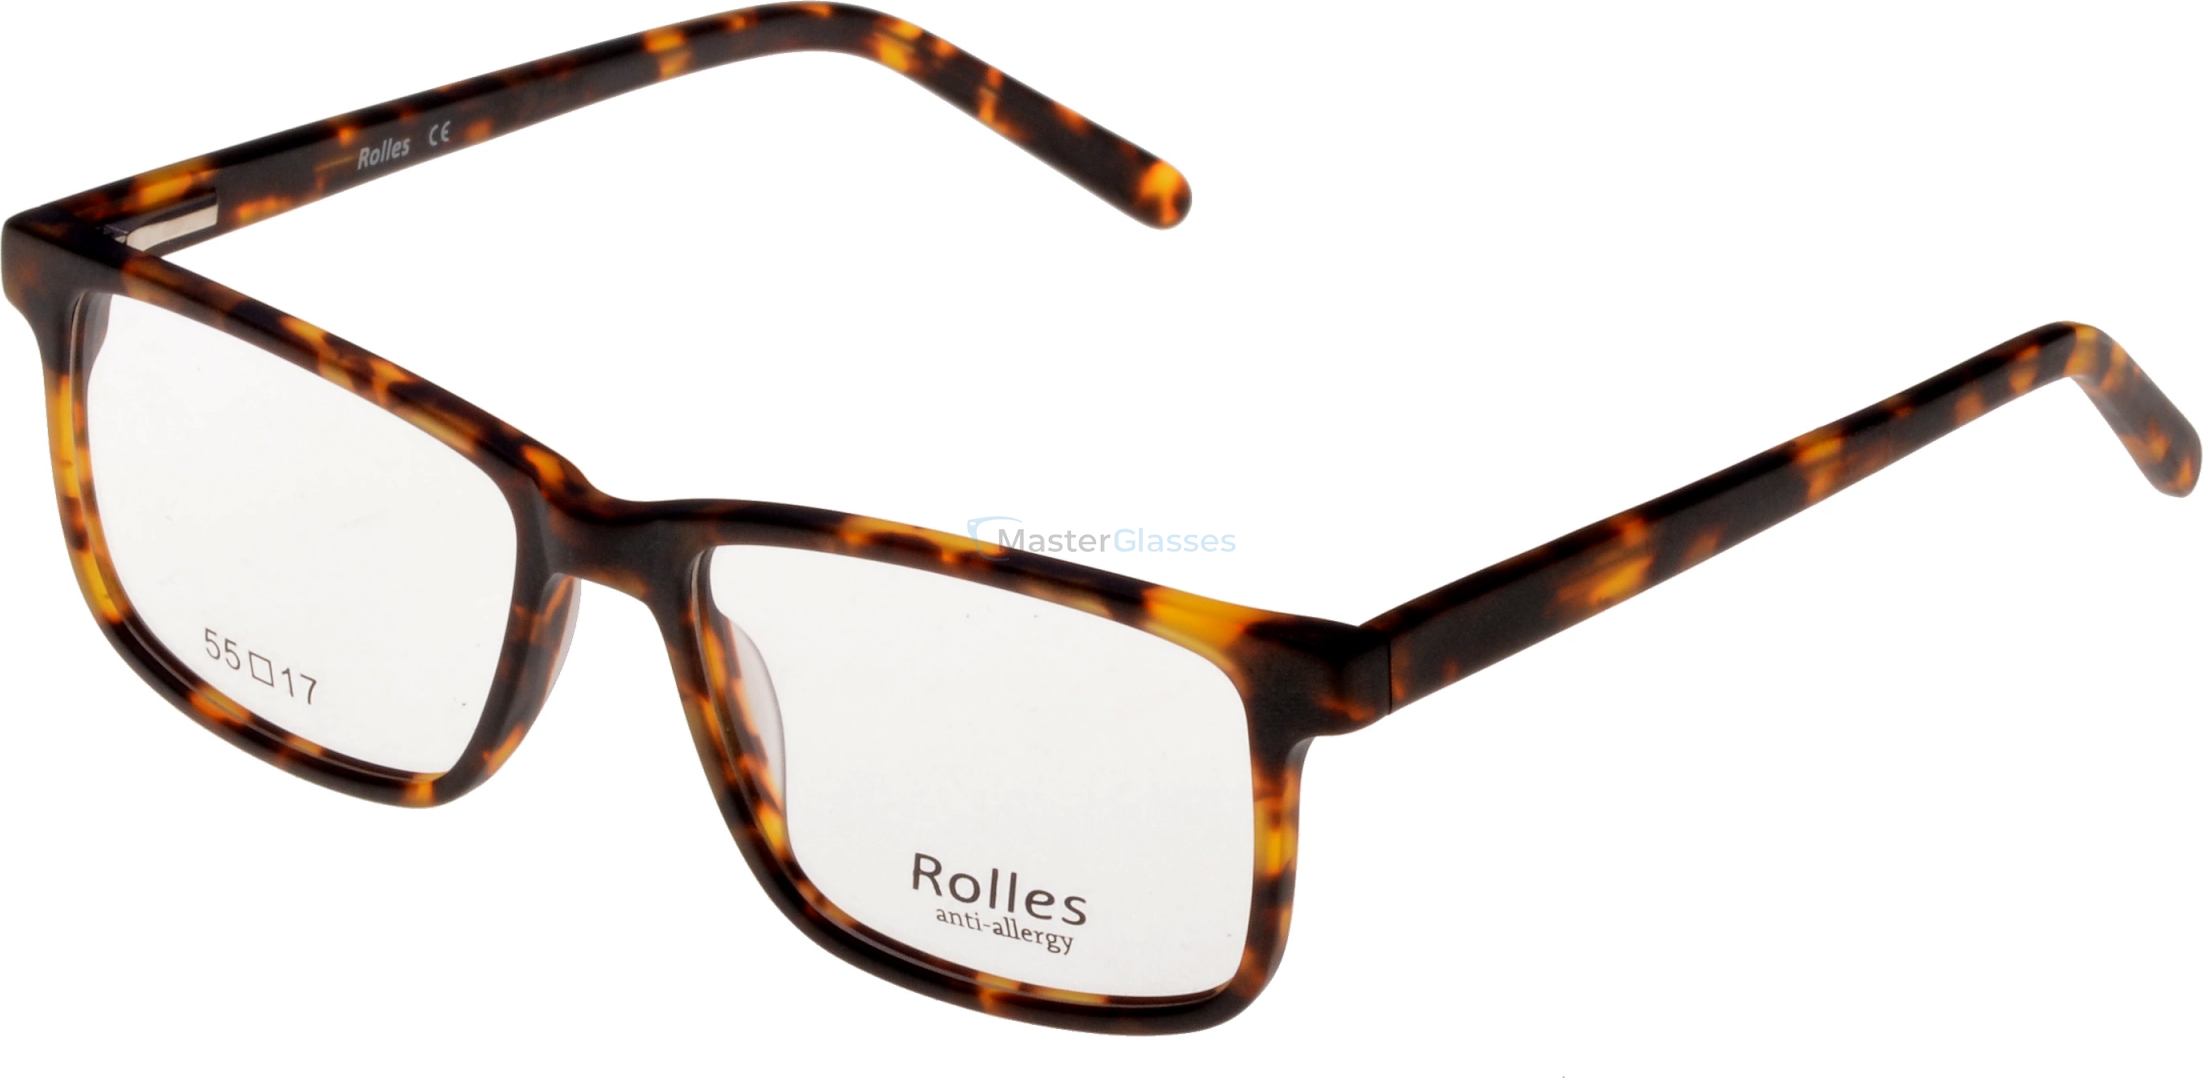  Rolles 532 03